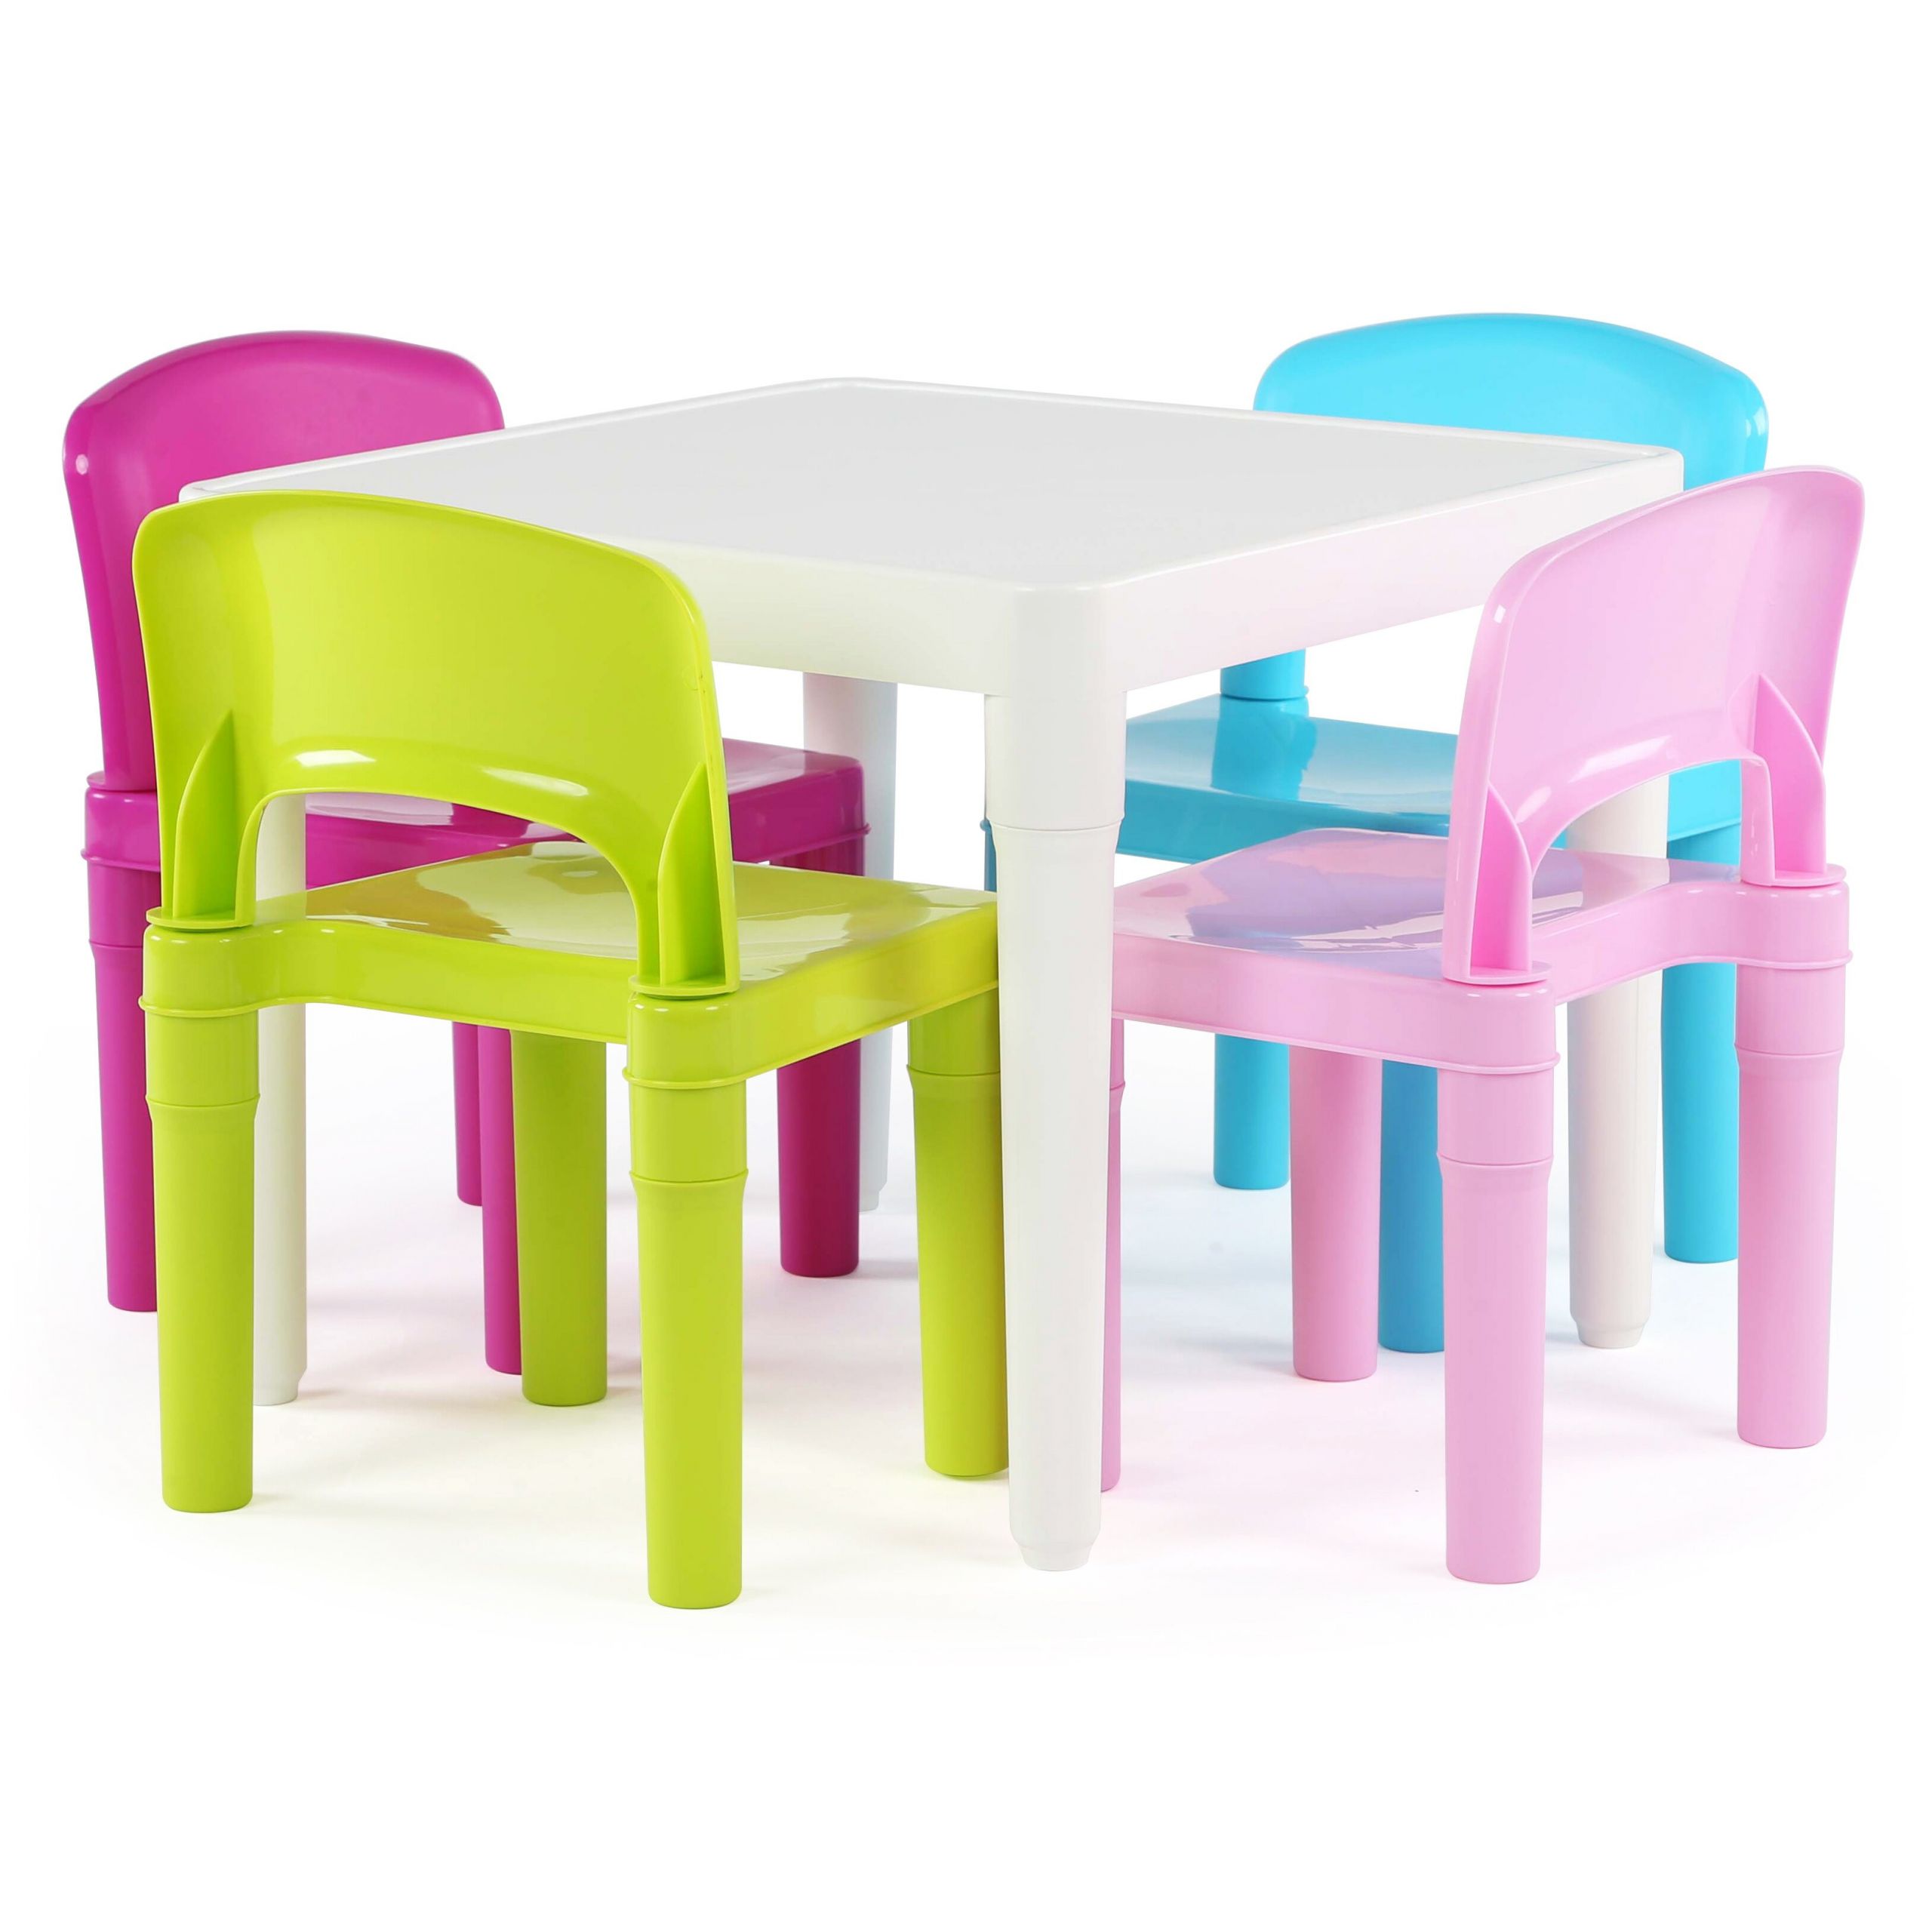 Kids Table And Chair Set
 Tot Tutors Kids 5 Piece Square Table and Chair Set